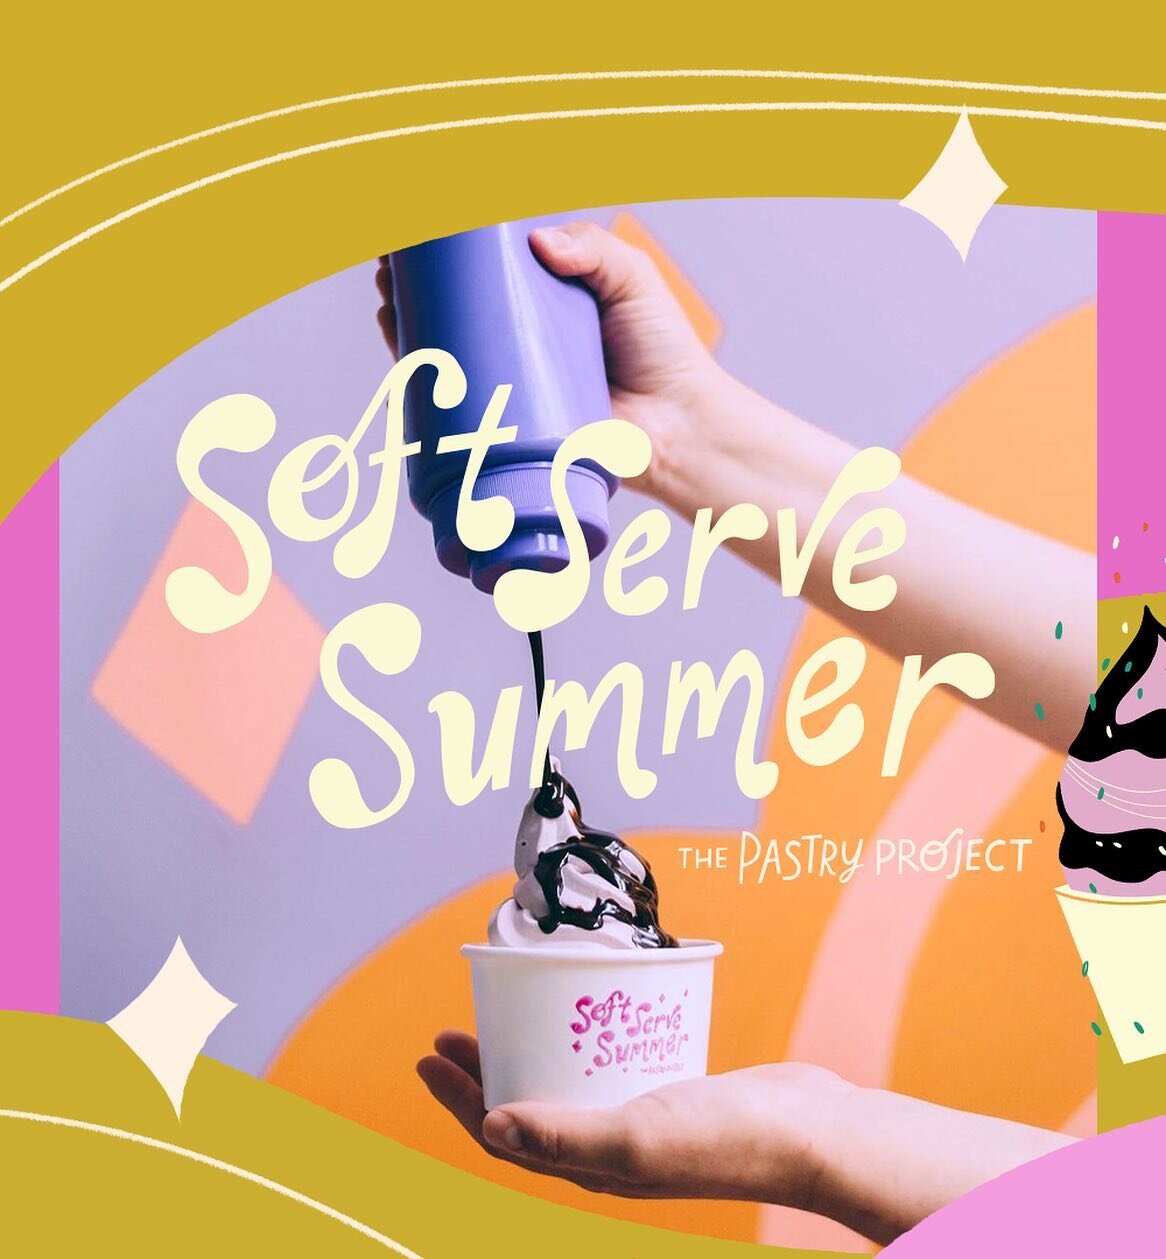 SOFT SERVE SUMMER! Here is a little snippet of work more work I did with @thepastryproject_ 🍦 It was so fun seeing this work pop up in my feed - every sprinkled cone and chomped ice cream sammy was a real treat to see.

It&rsquo;s also the LAST WEEK